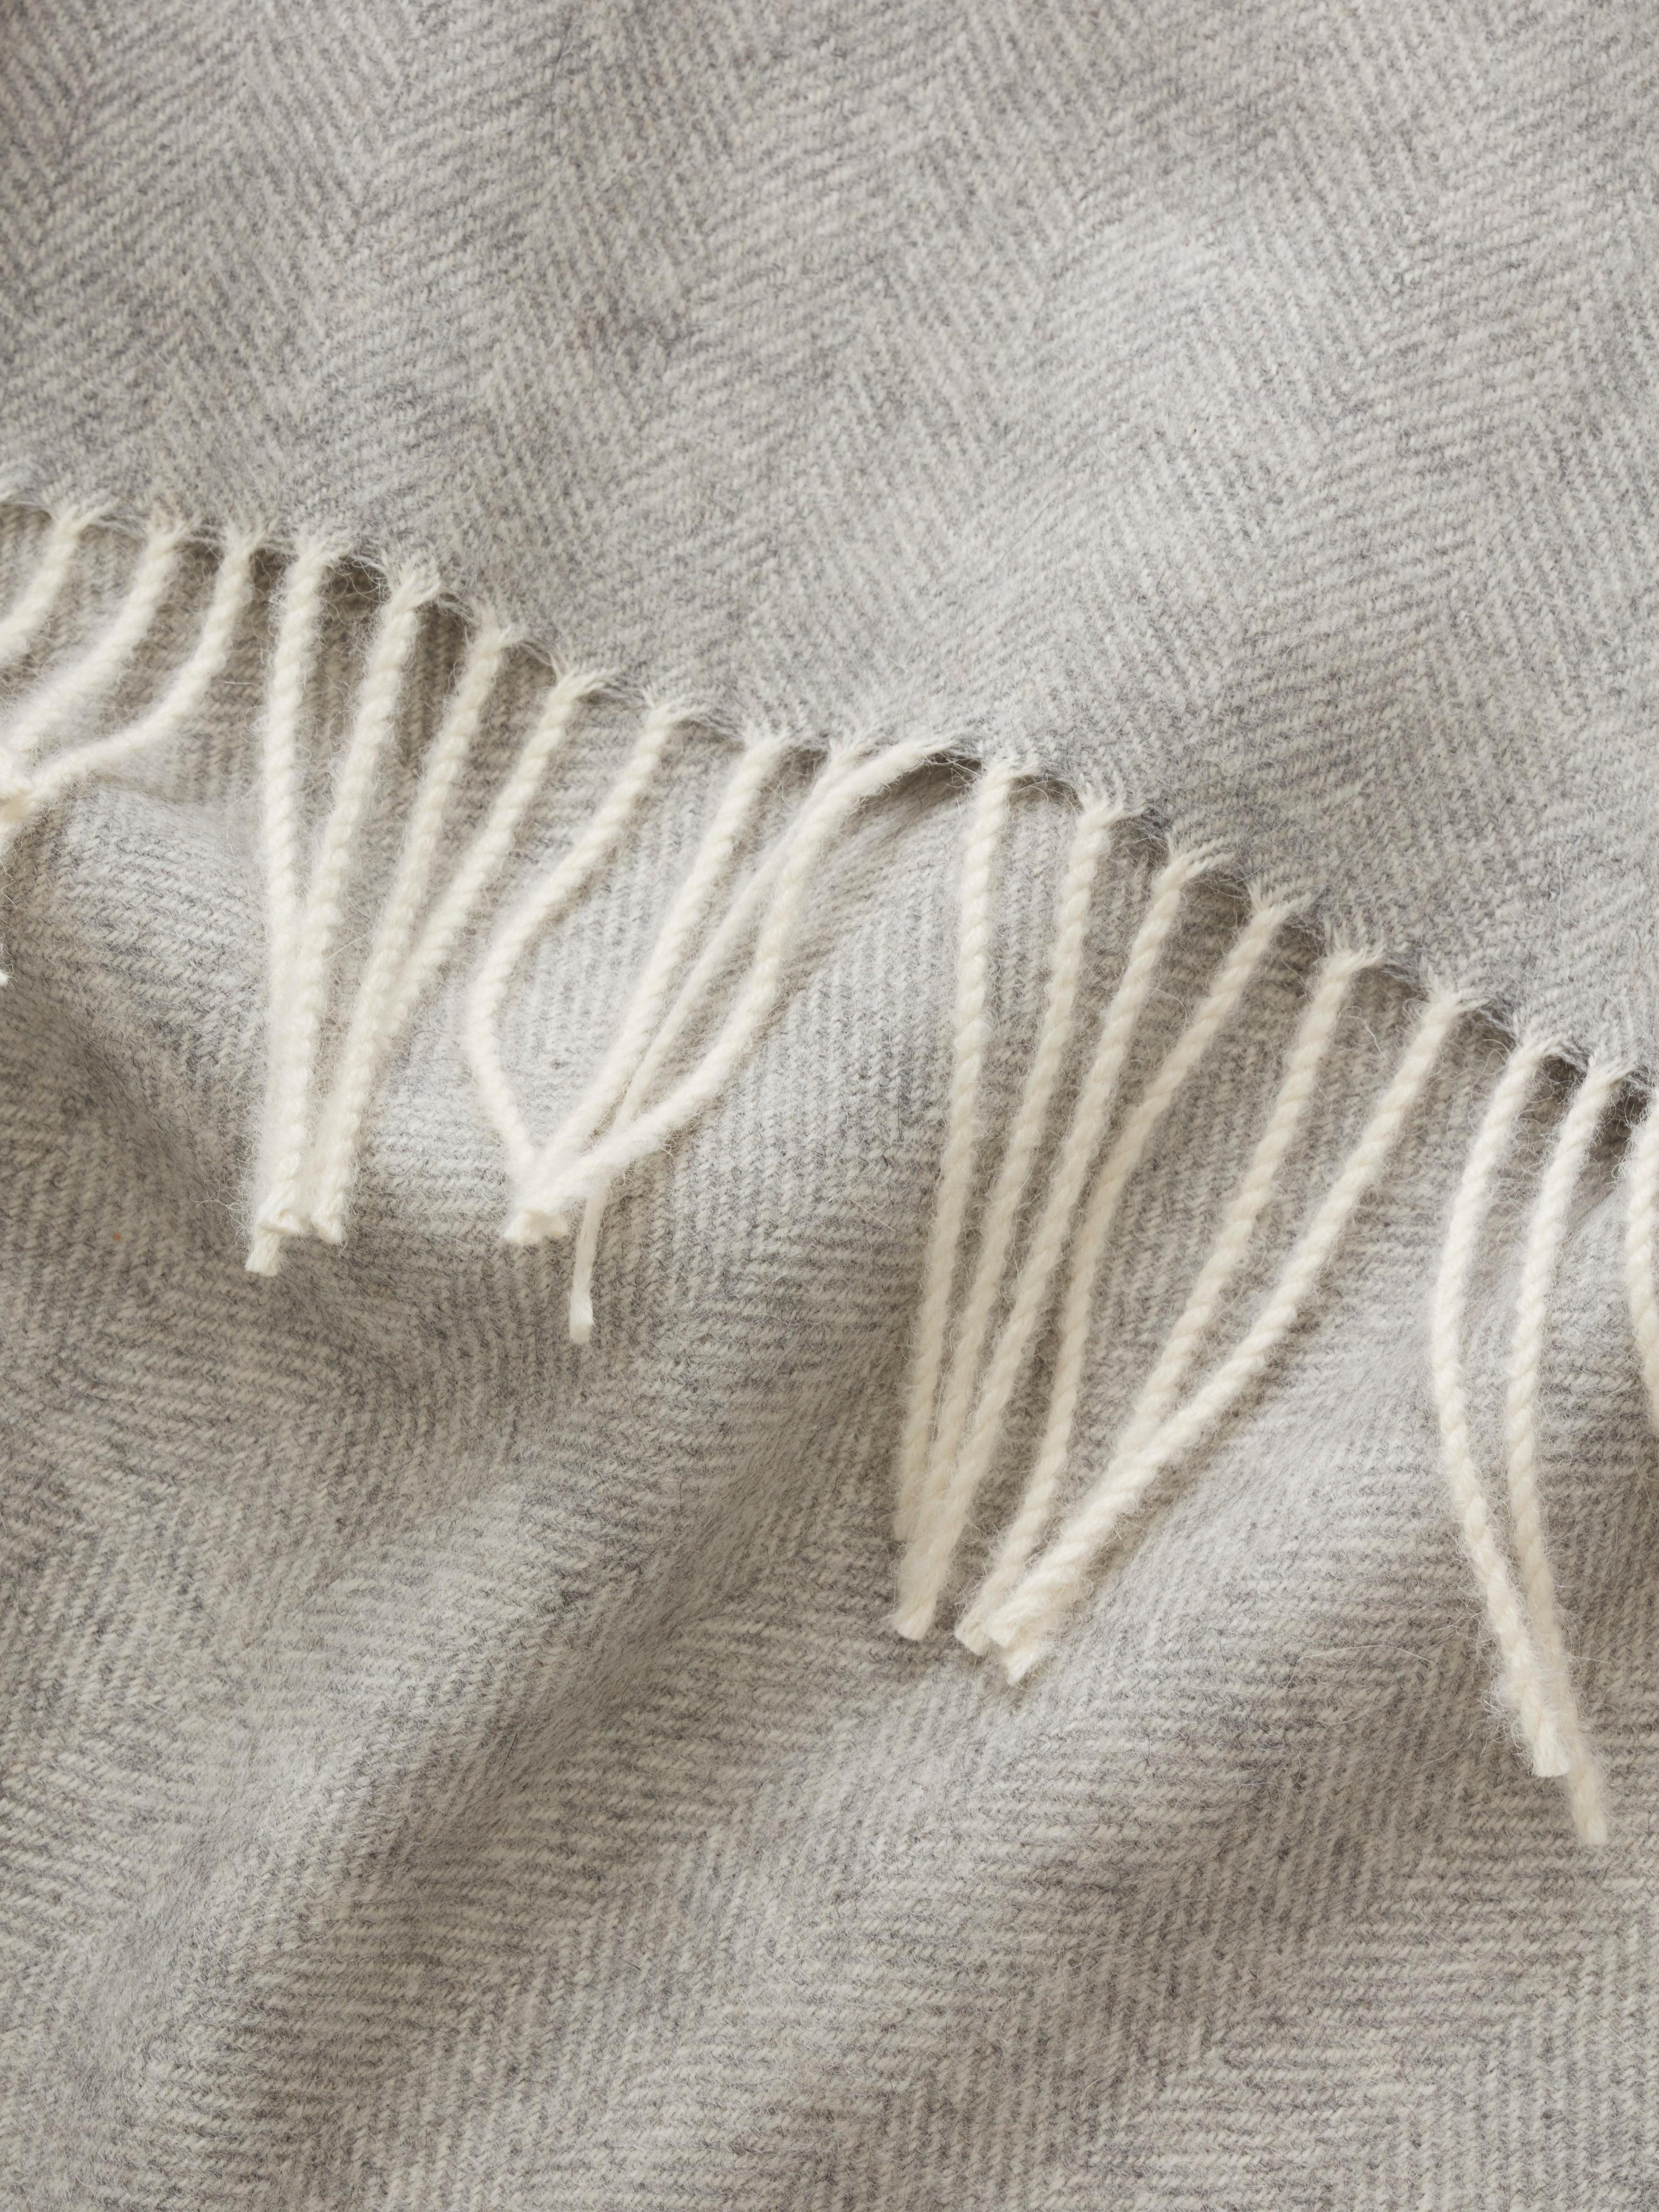 Handmade 100% Royal Baby Alpaca Sill Herringbone Throw by Fells/Andes In Excellent Condition For Sale In San Francisco, CA